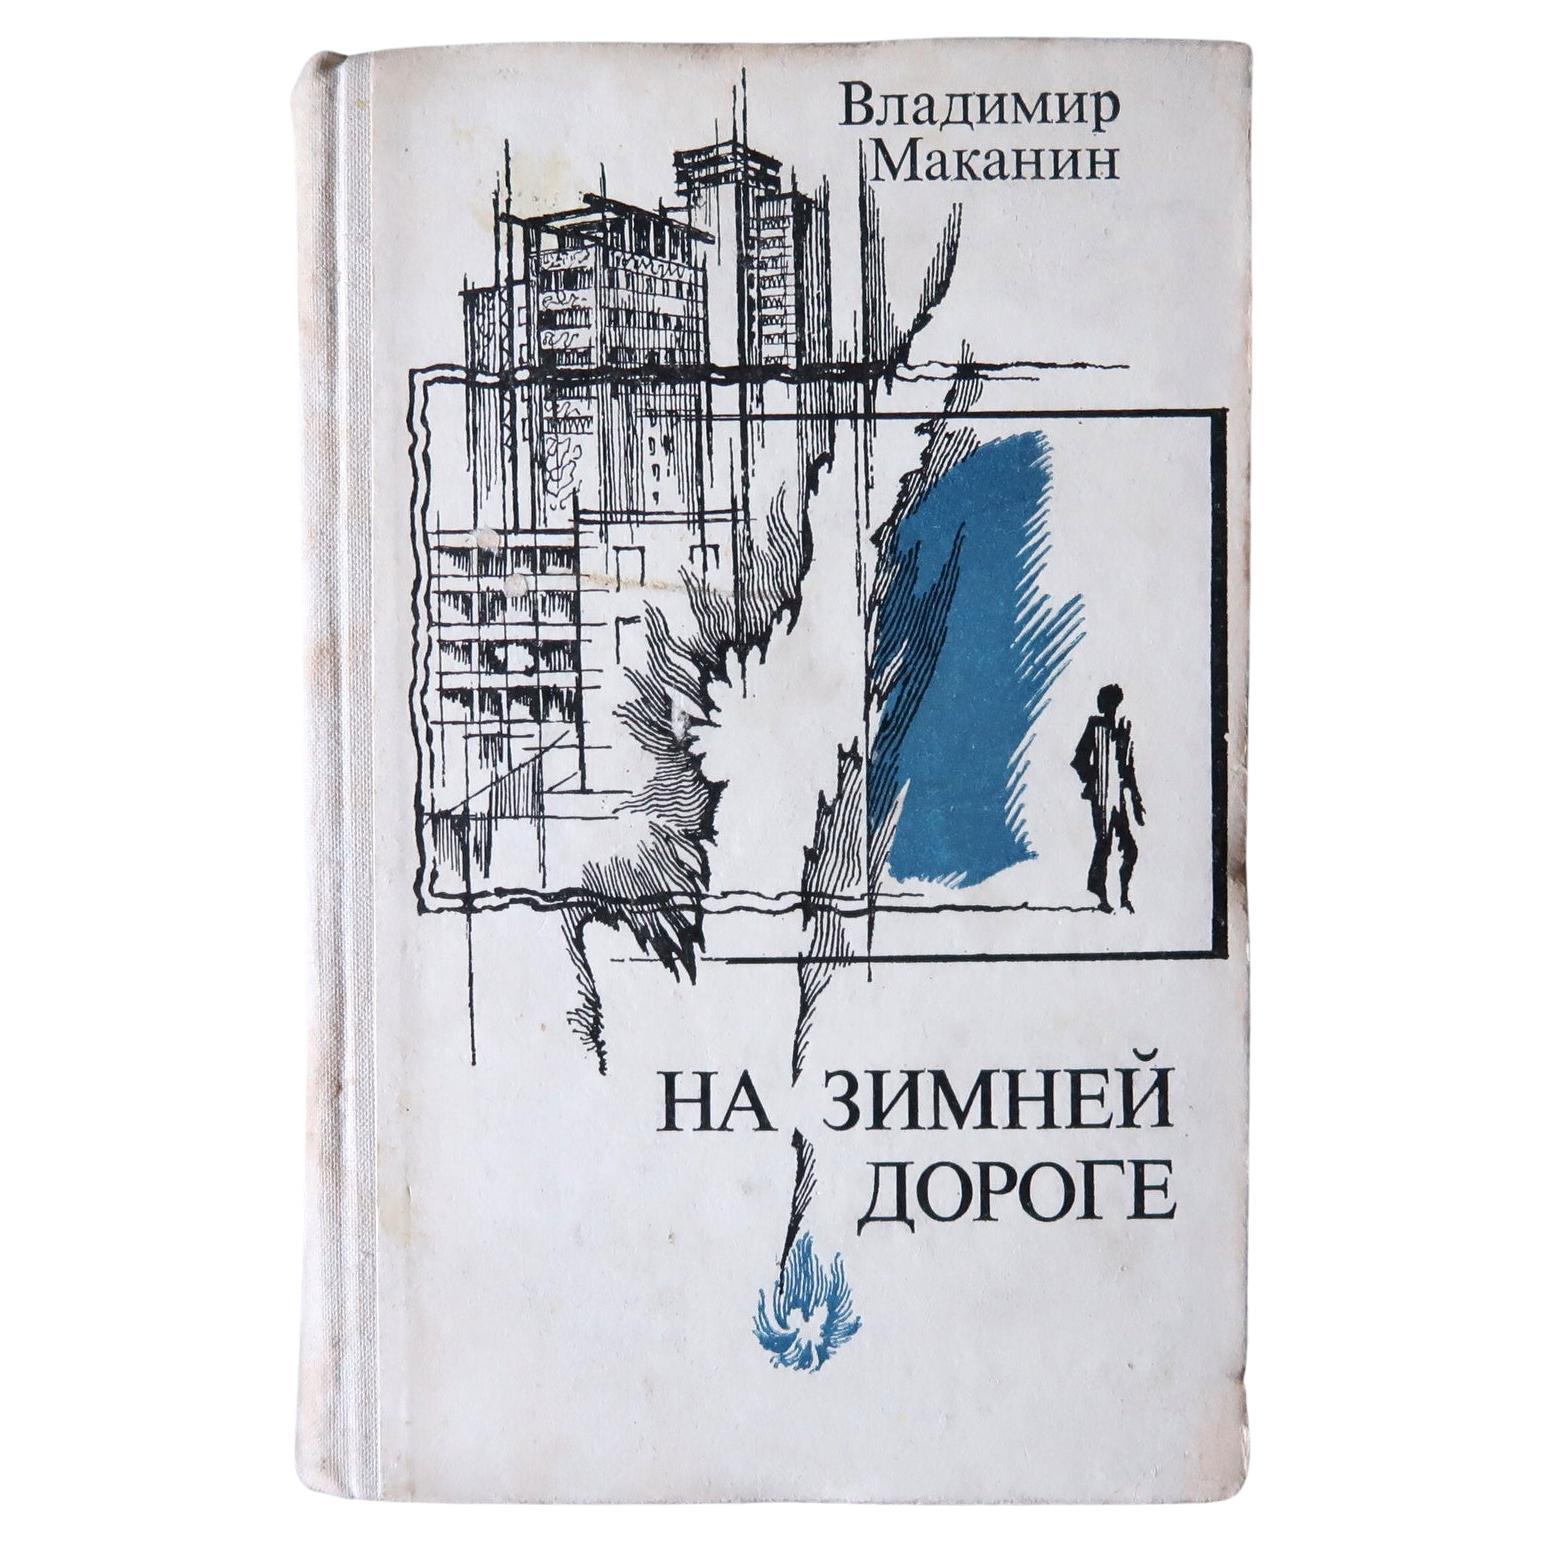 Vintage USSR Book: 'On the Winter Road' by Vladimir Makanin, 1J122 For Sale